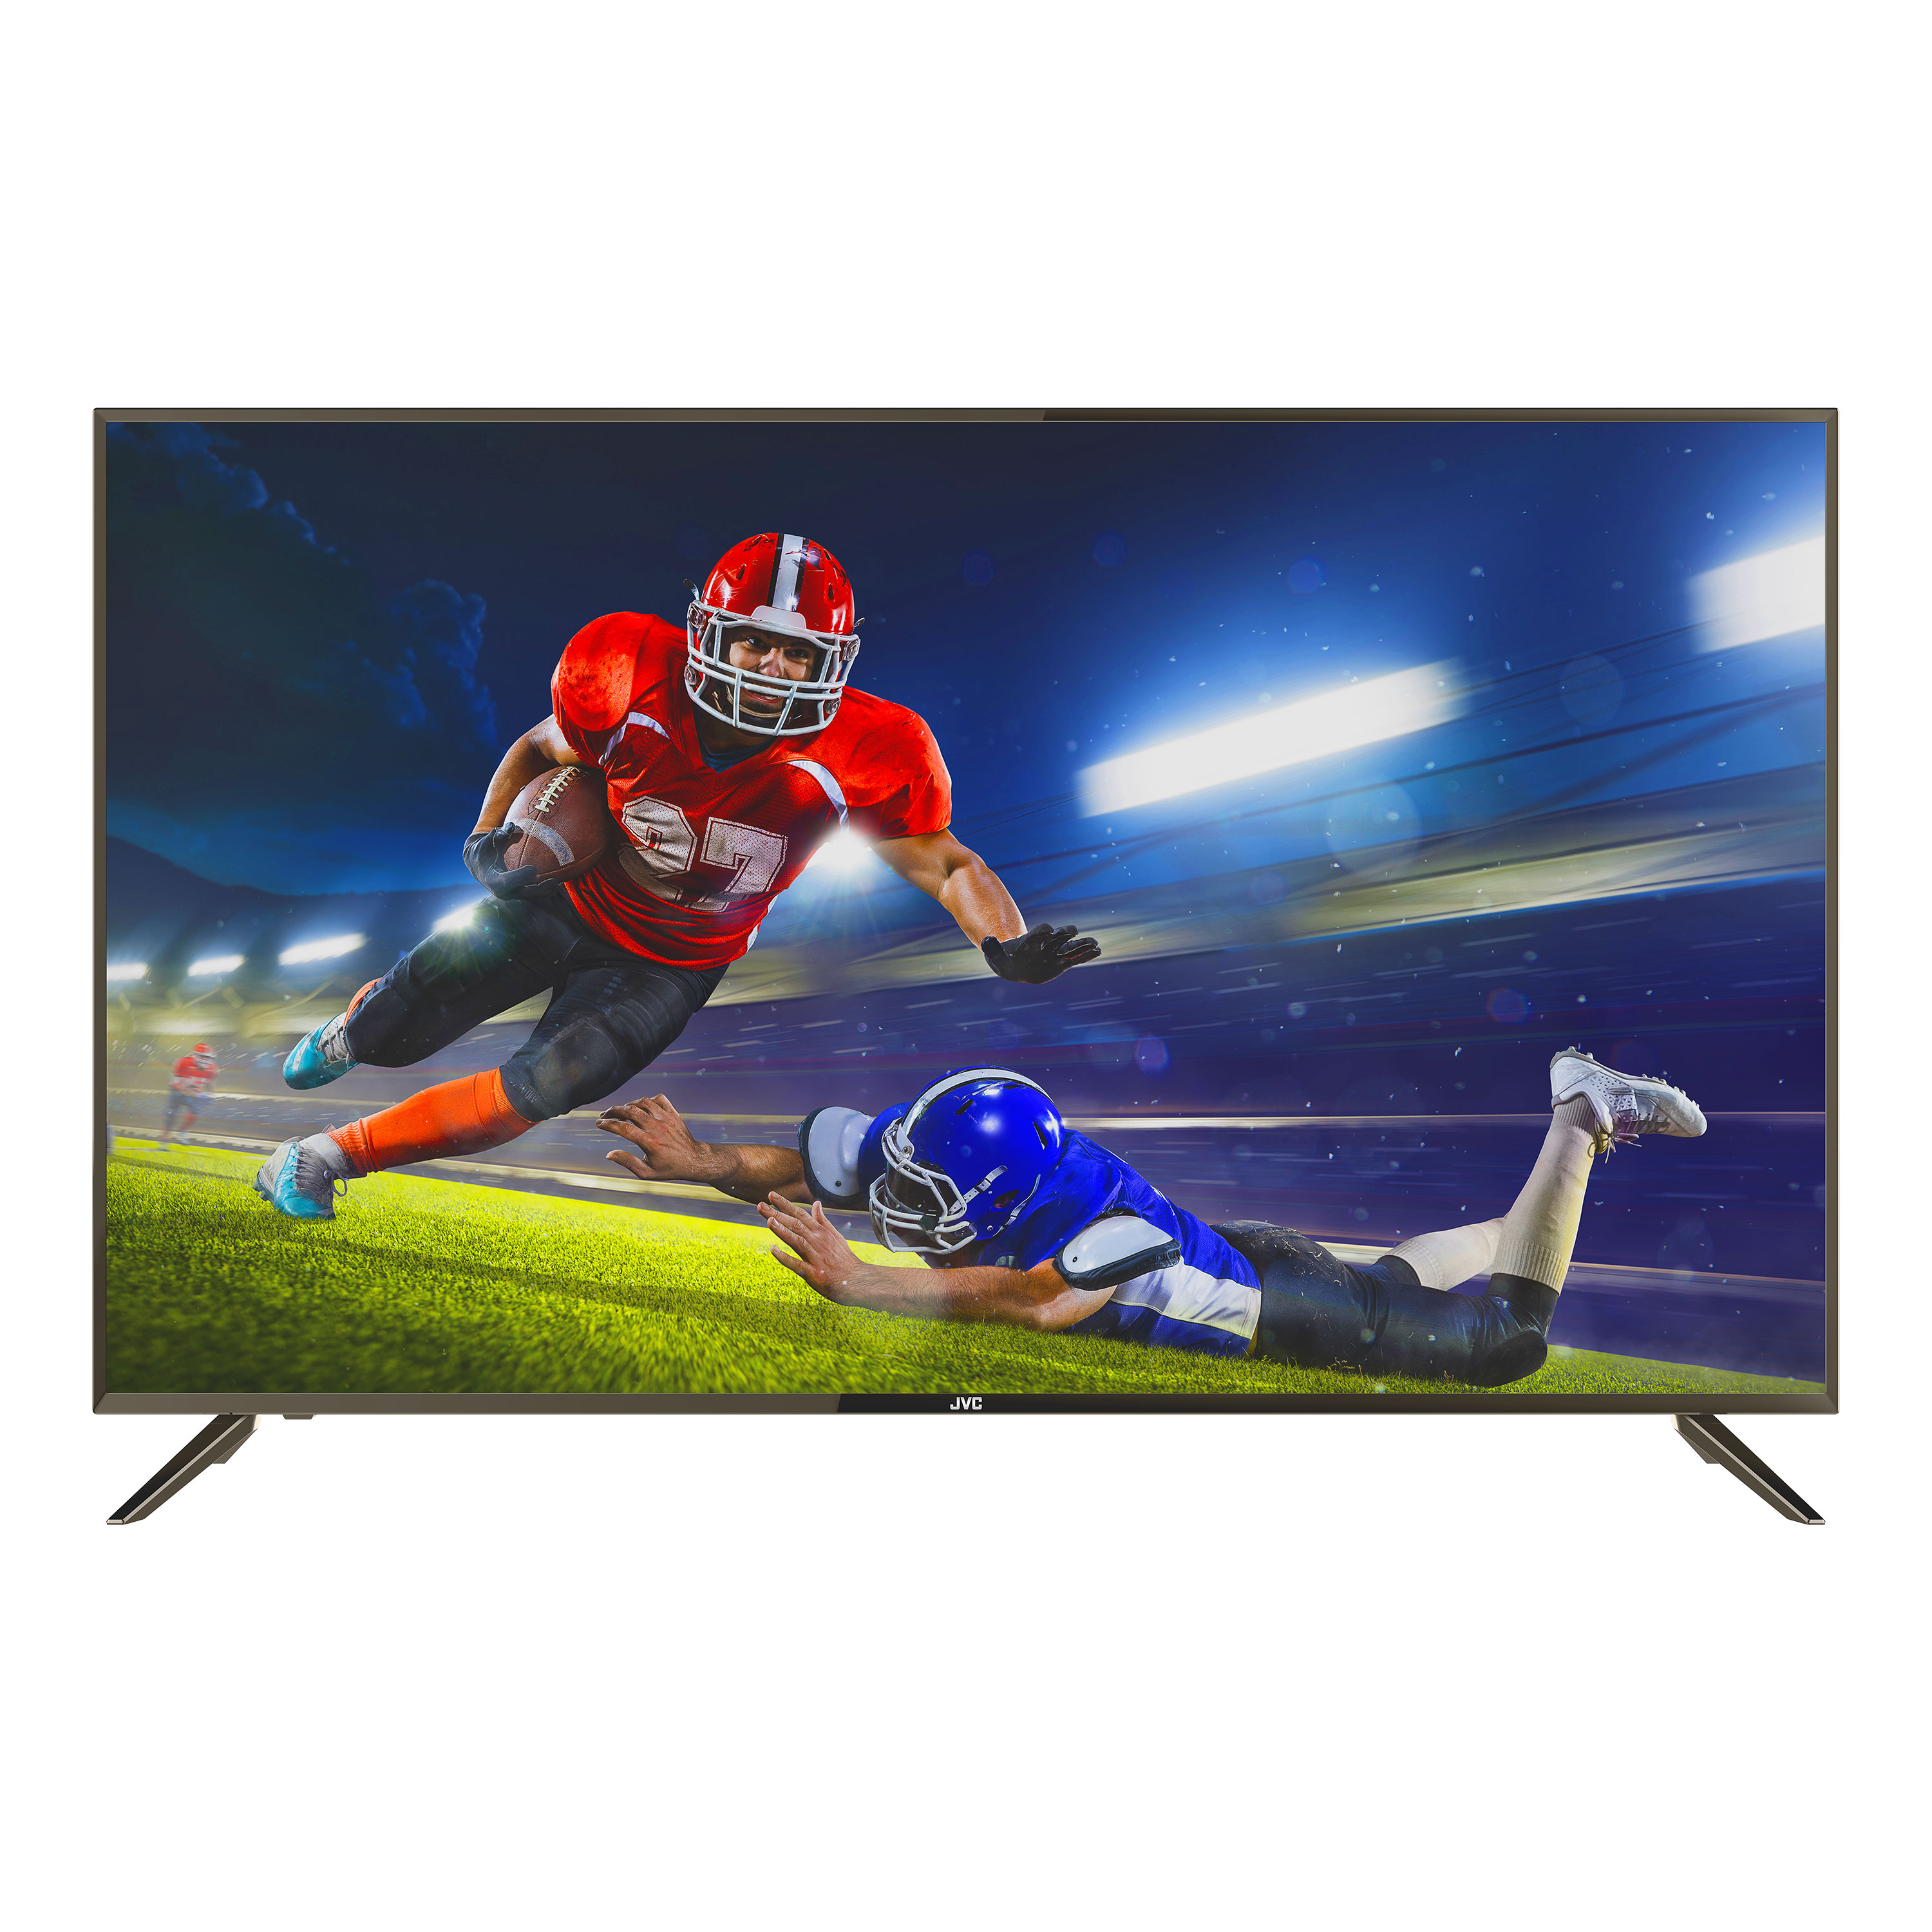 JVC 55" Class 4K Ultra HD (2160P) HDR Smart LED TV with Built-in Chromecast (LT-55MA875) - image 3 of 8